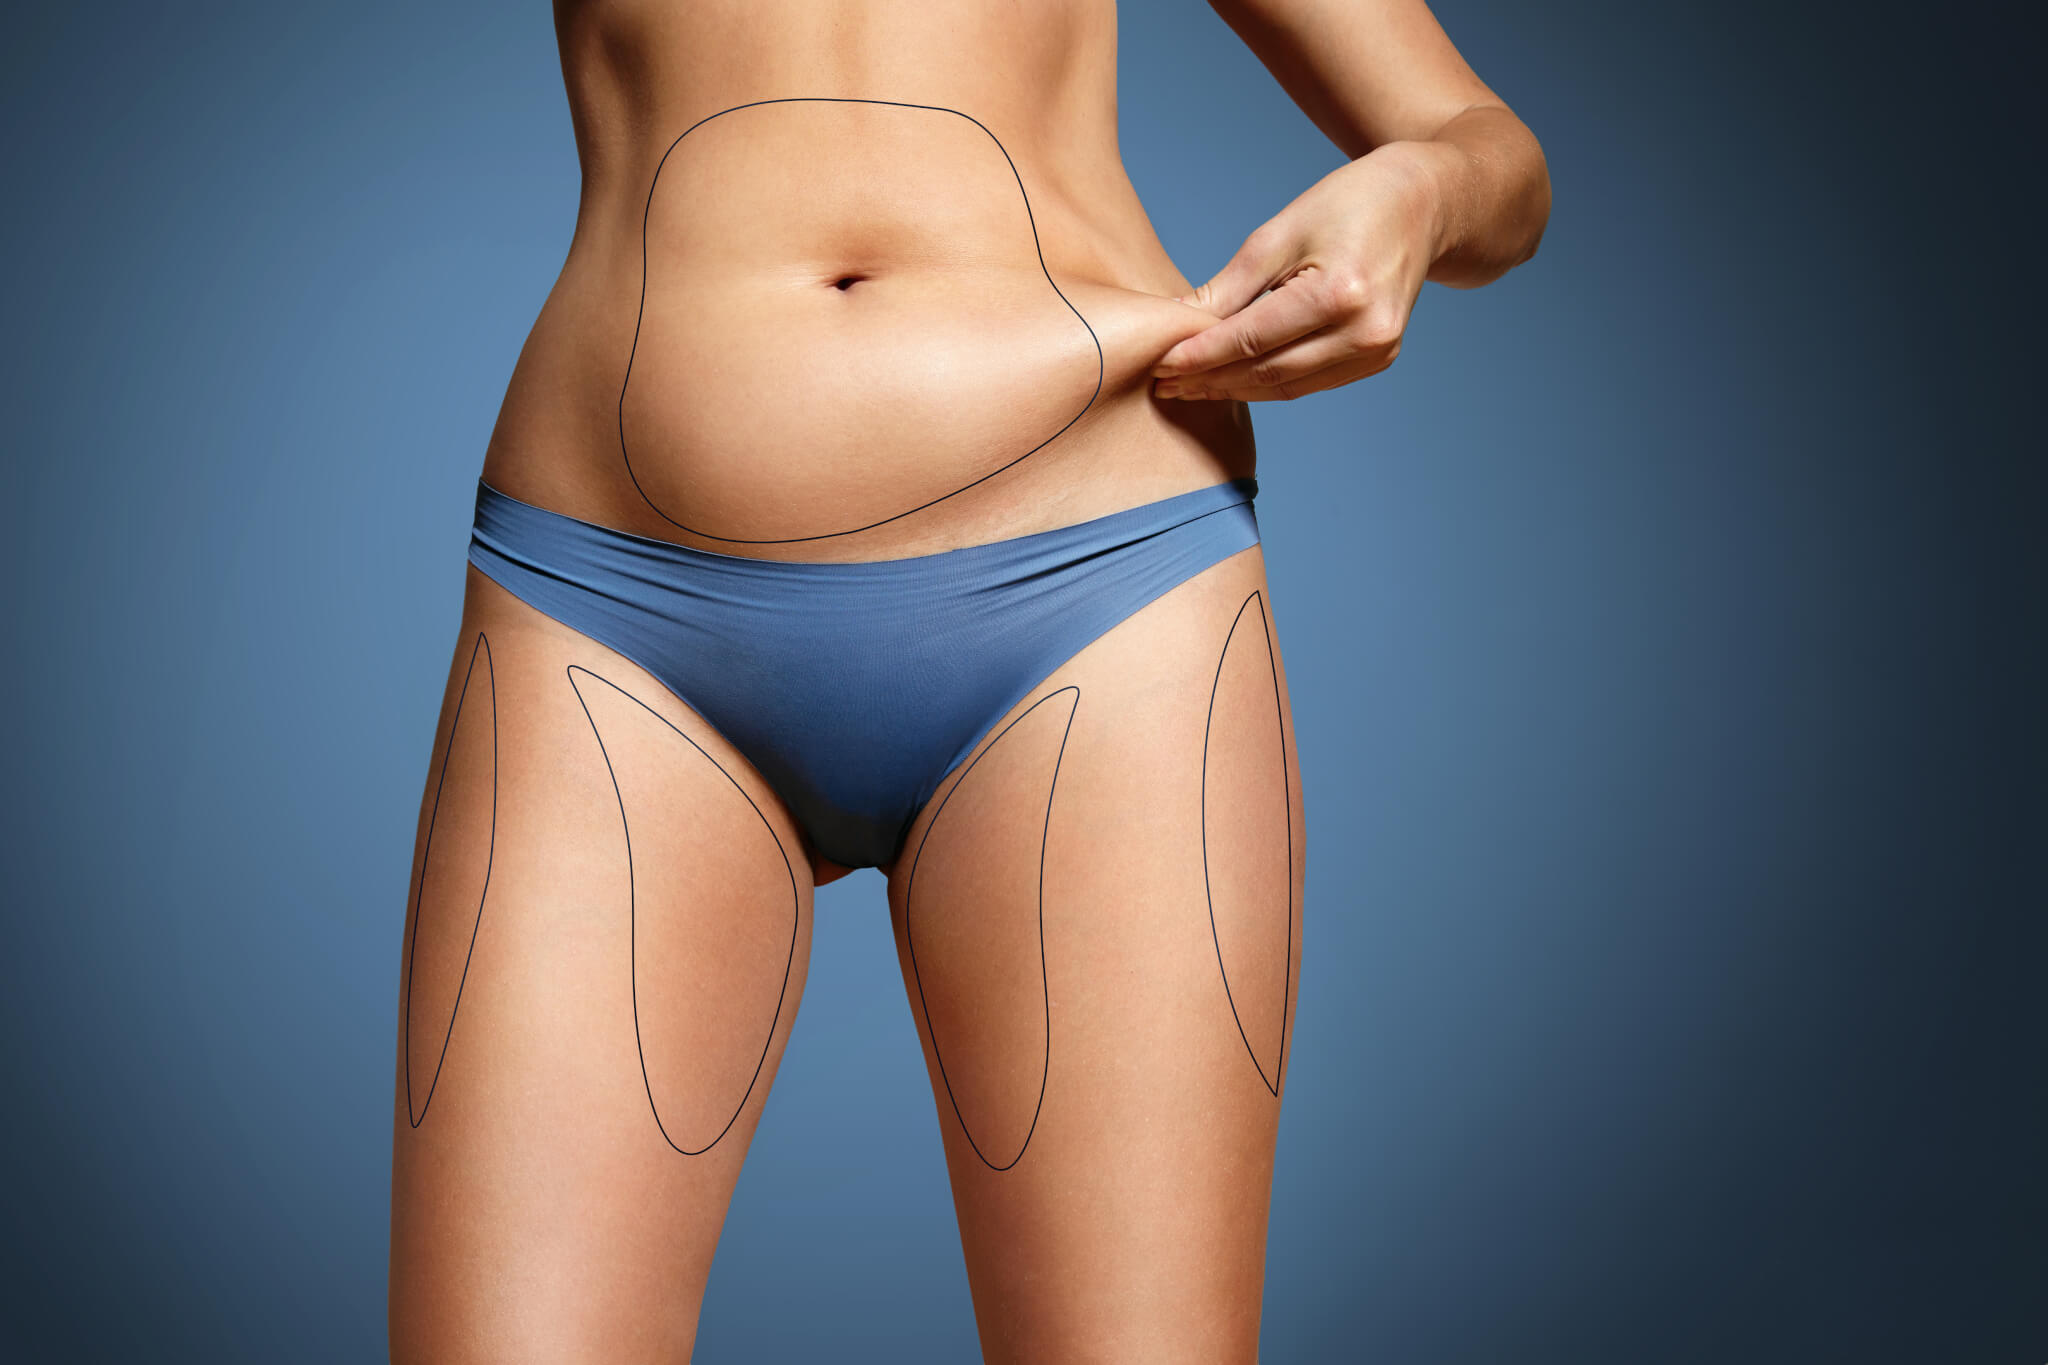 How to best prepare for a CoolSculpting Procedure